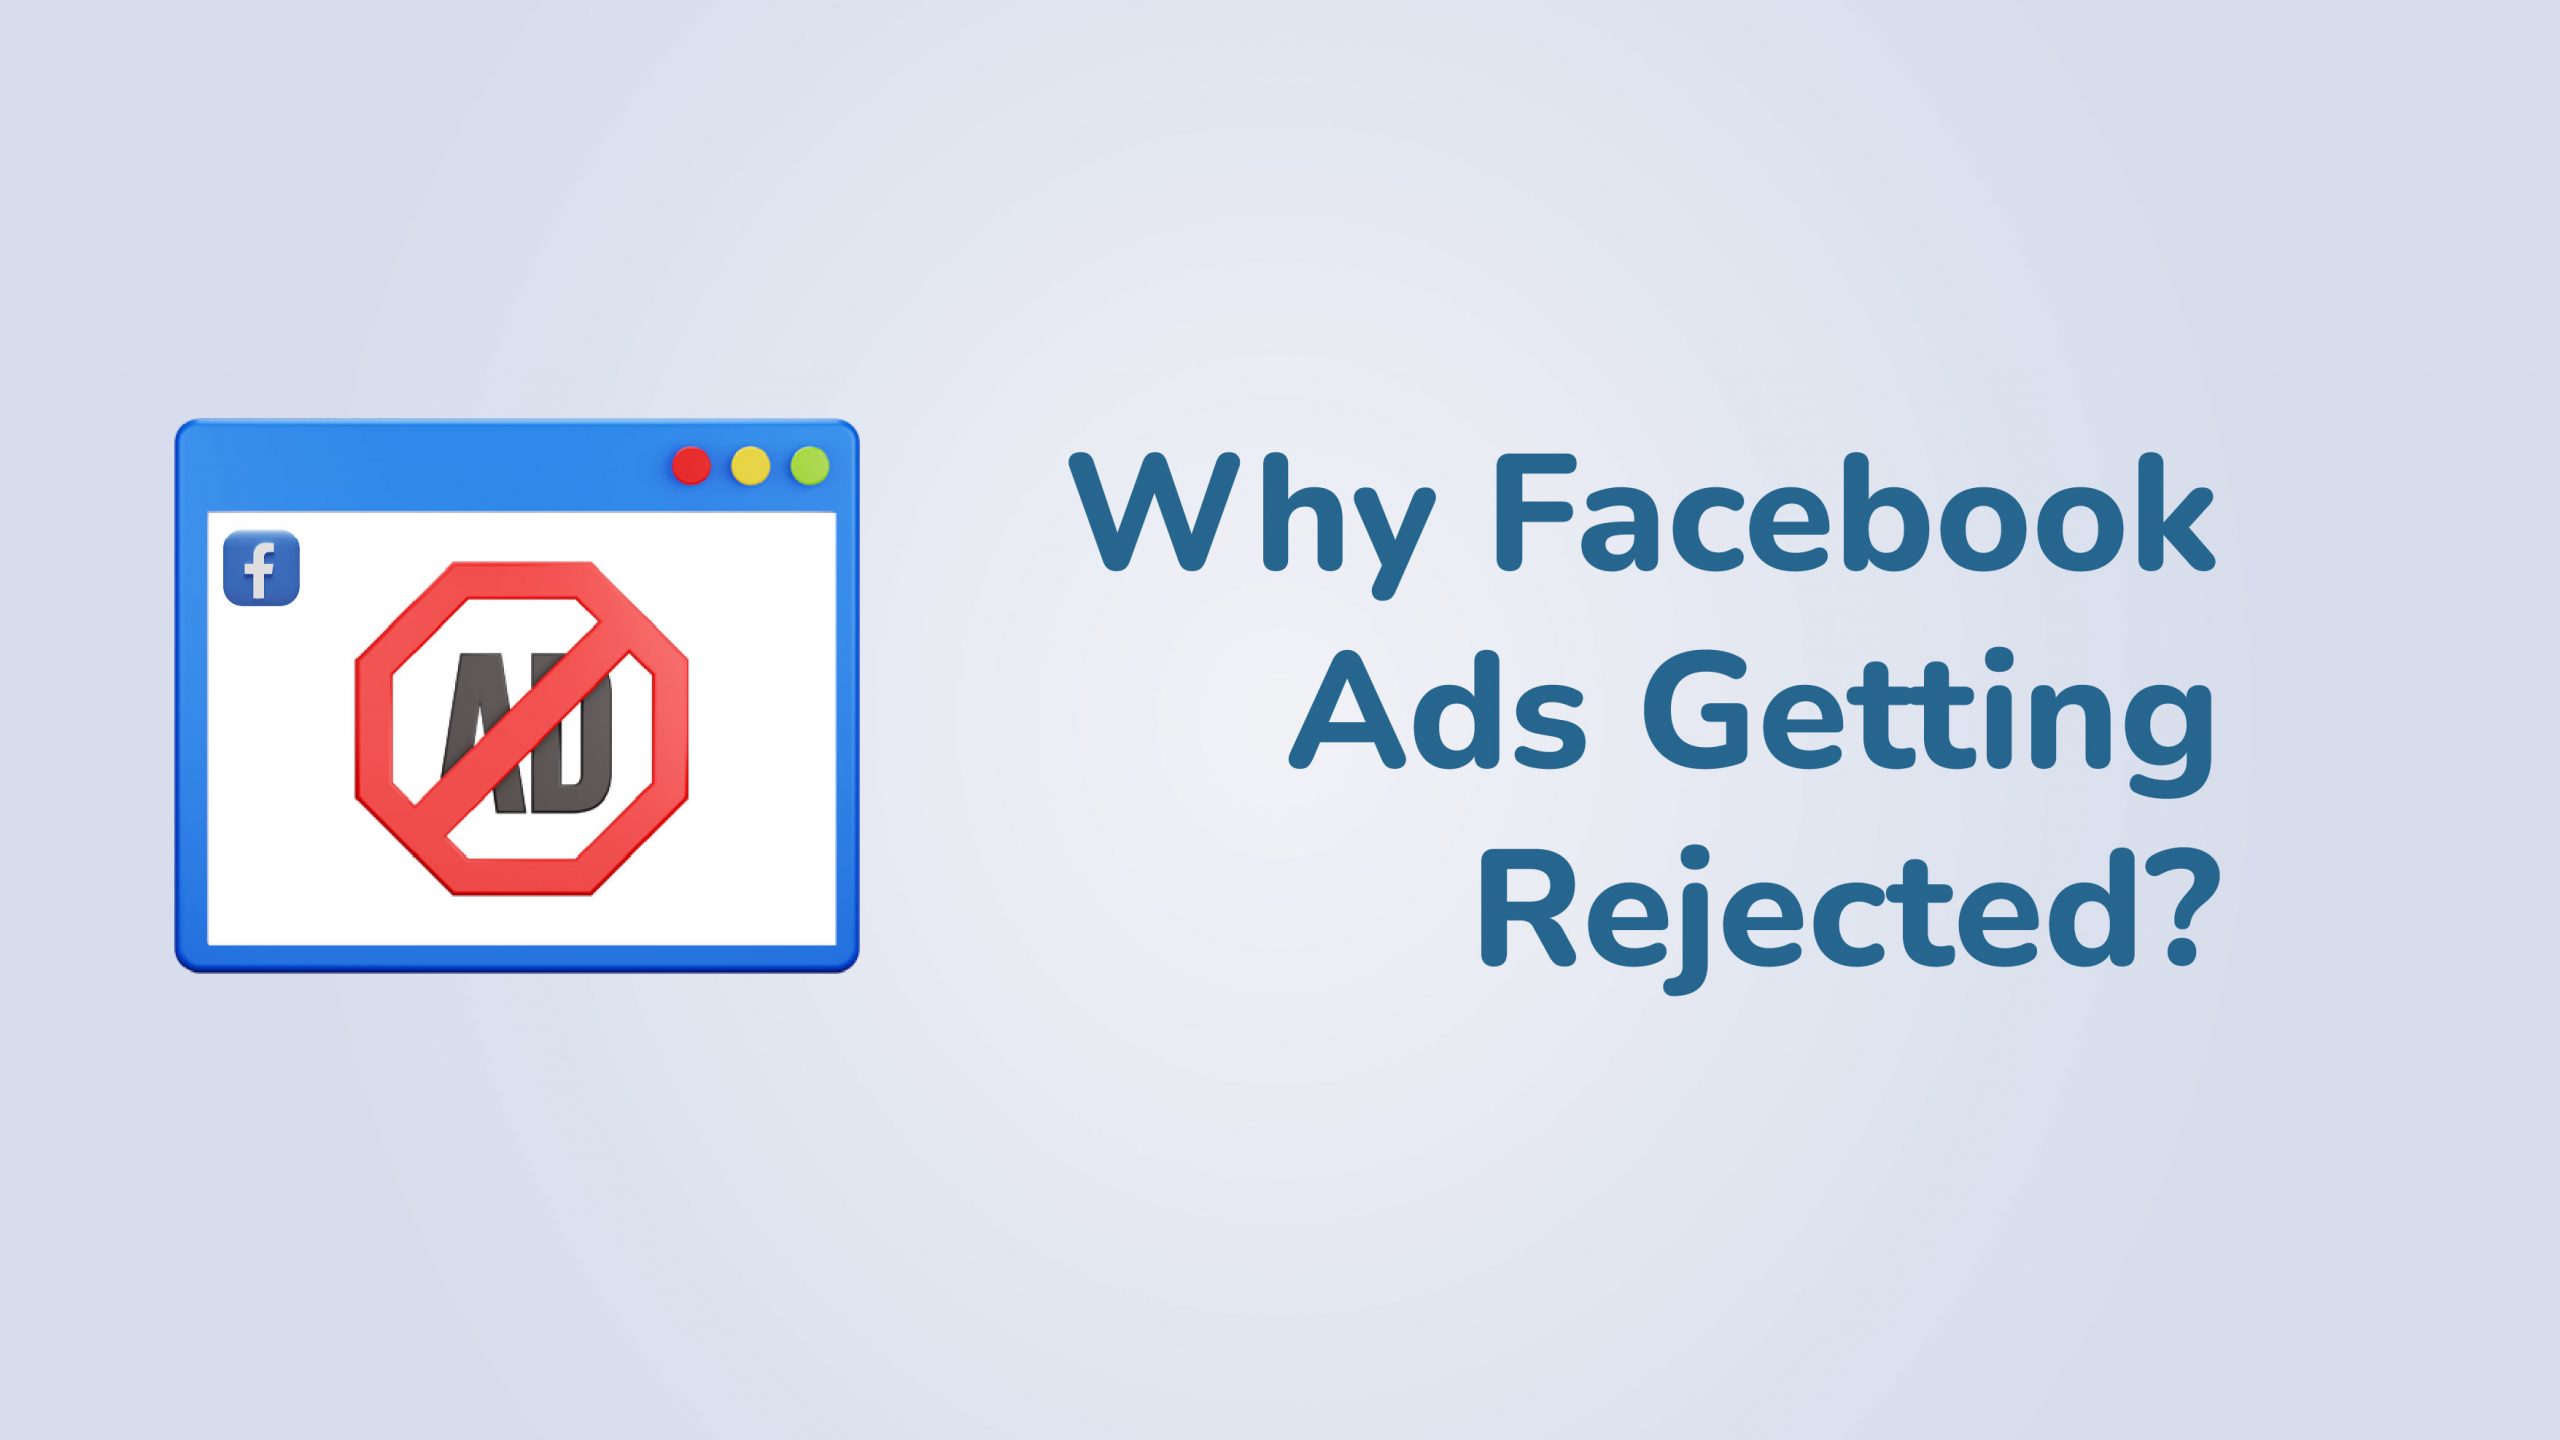 Why Facebook Ads Getting Rejected